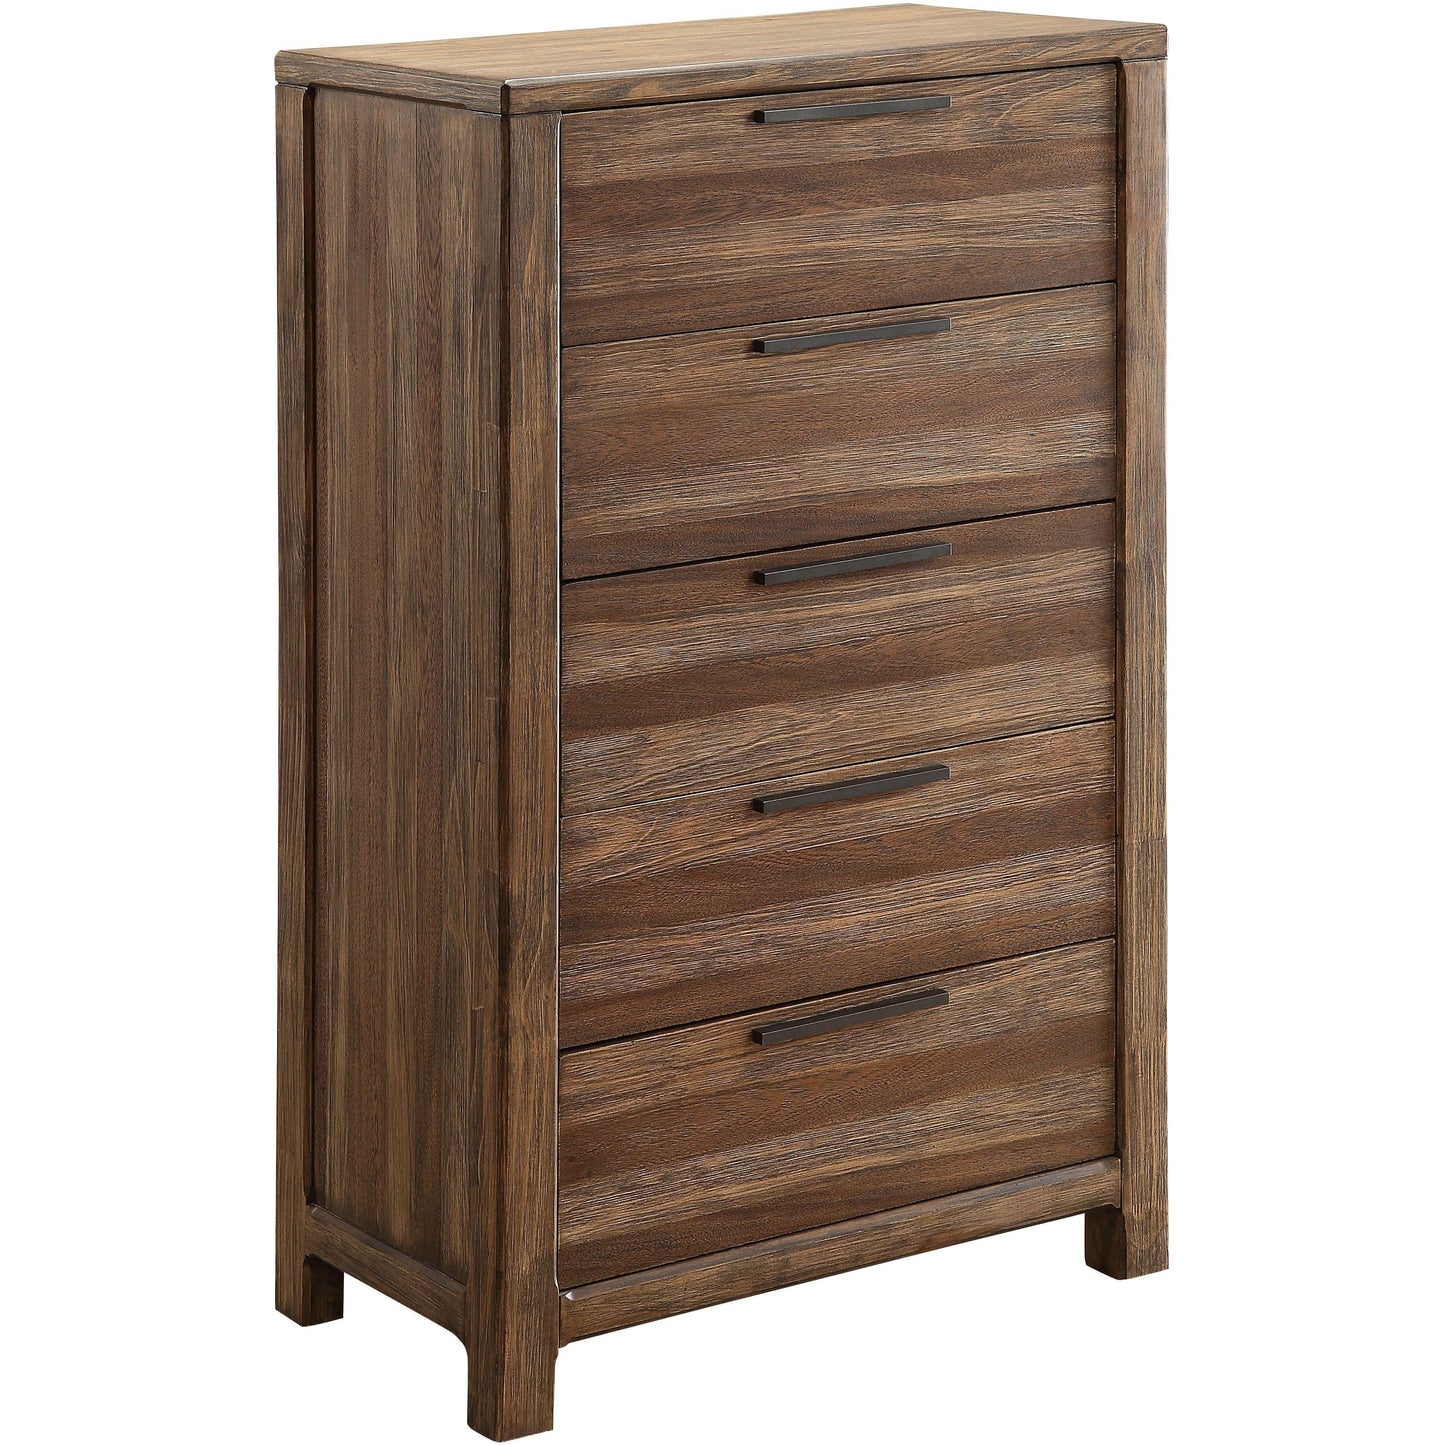 Furniture of America Chests Morris Rustic Style Natural Tone, 5-Drawer Chest